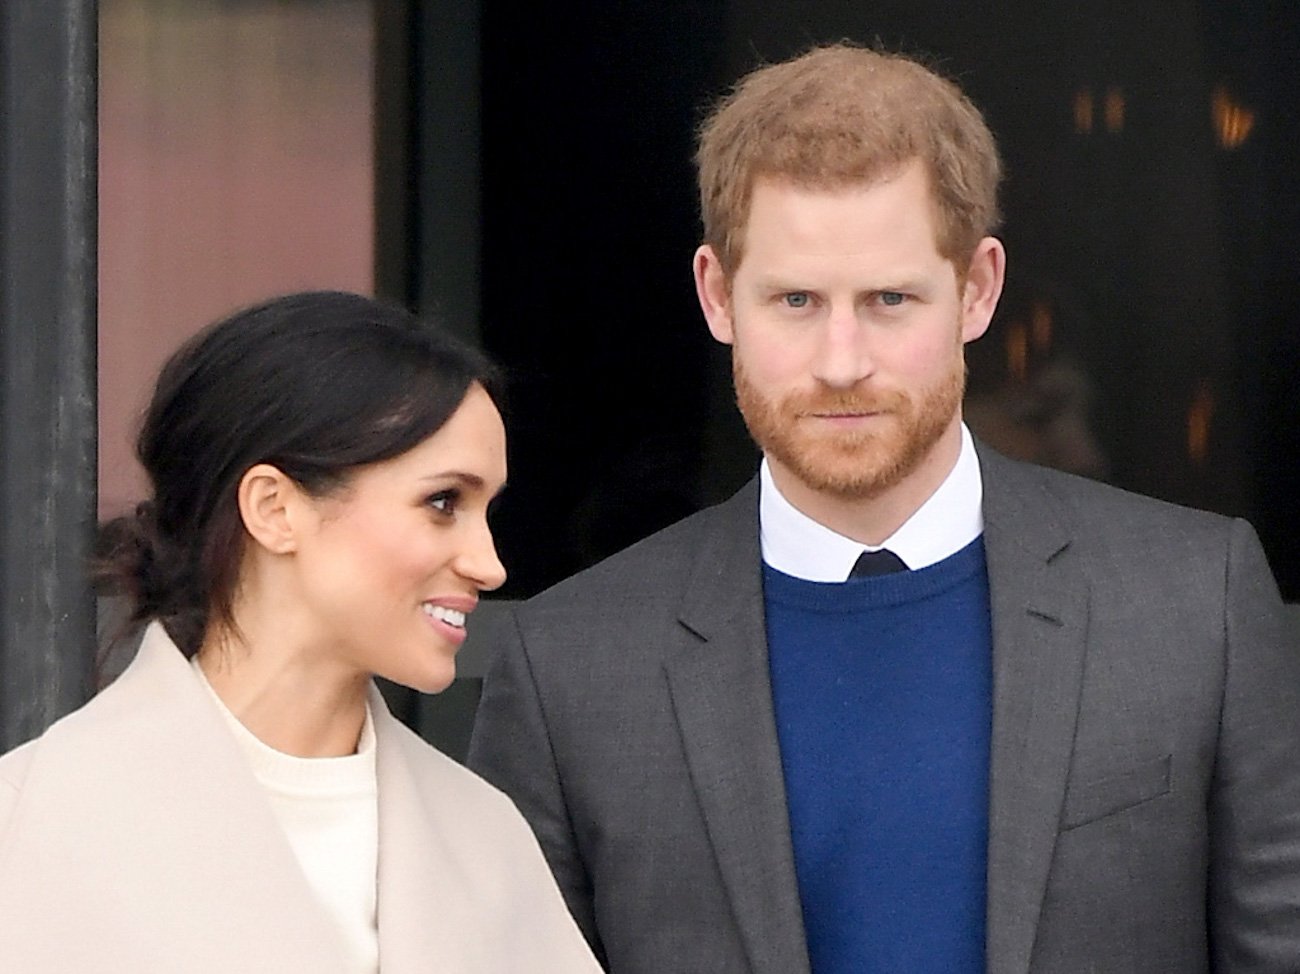 Meghan Markle smiling and looking to the right, Prince Harry looking on in the camera's direction